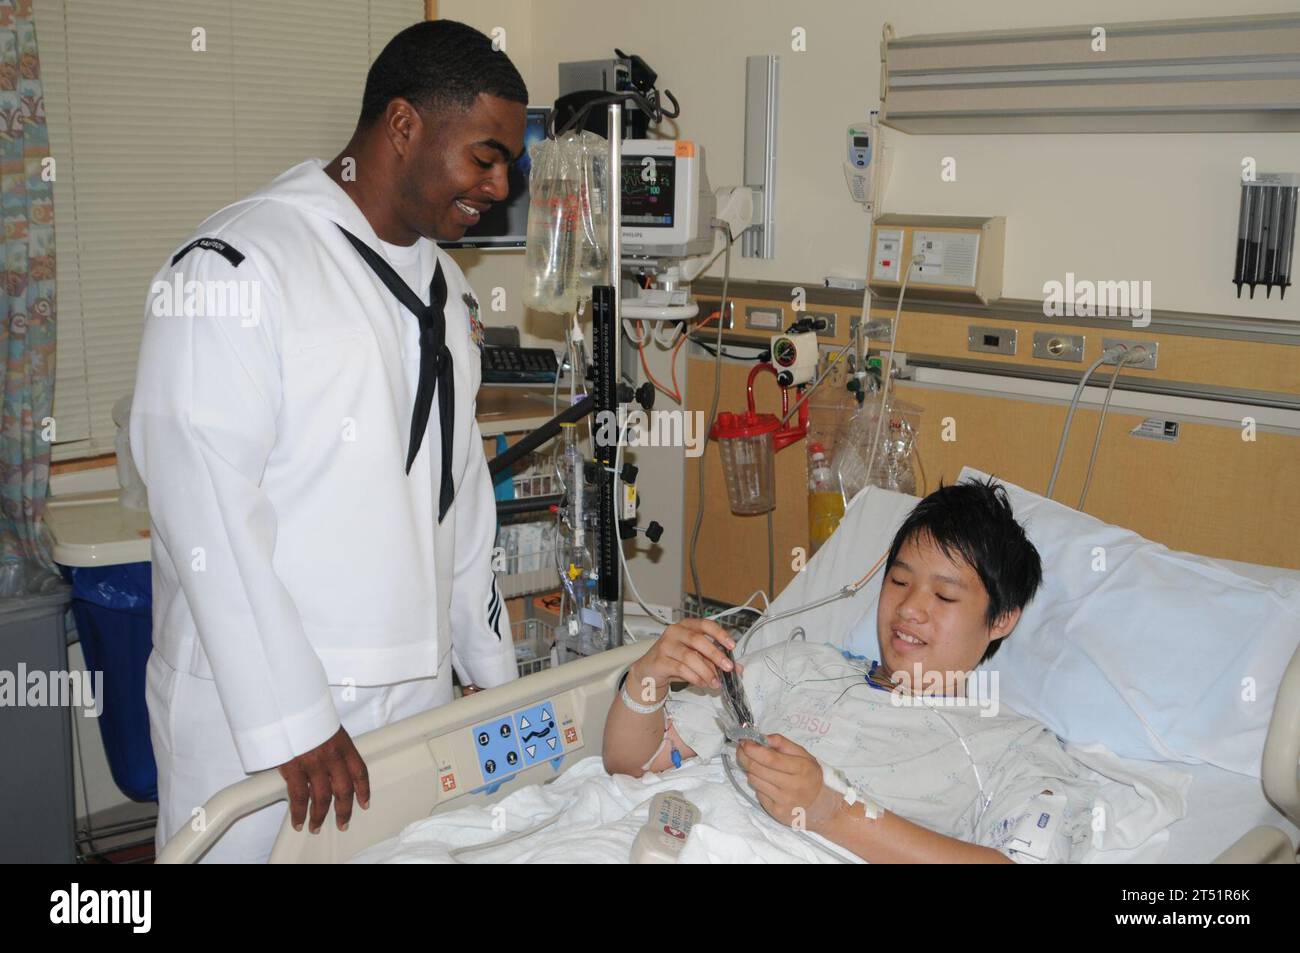 1006047783B-001 PORTLAND, Ore. (June 4, 2010) Ship's Serviceman 1st Class Michael Davis, left, assigned to the guided-missile destroyer USS Sampson (DDG 102), talks to a patient at Doernbecher Children's Hospital during a hospital visit. Sampson is conducting a port visit to Portland during the 2010 Portland Rose Festival. Navy Stock Photo